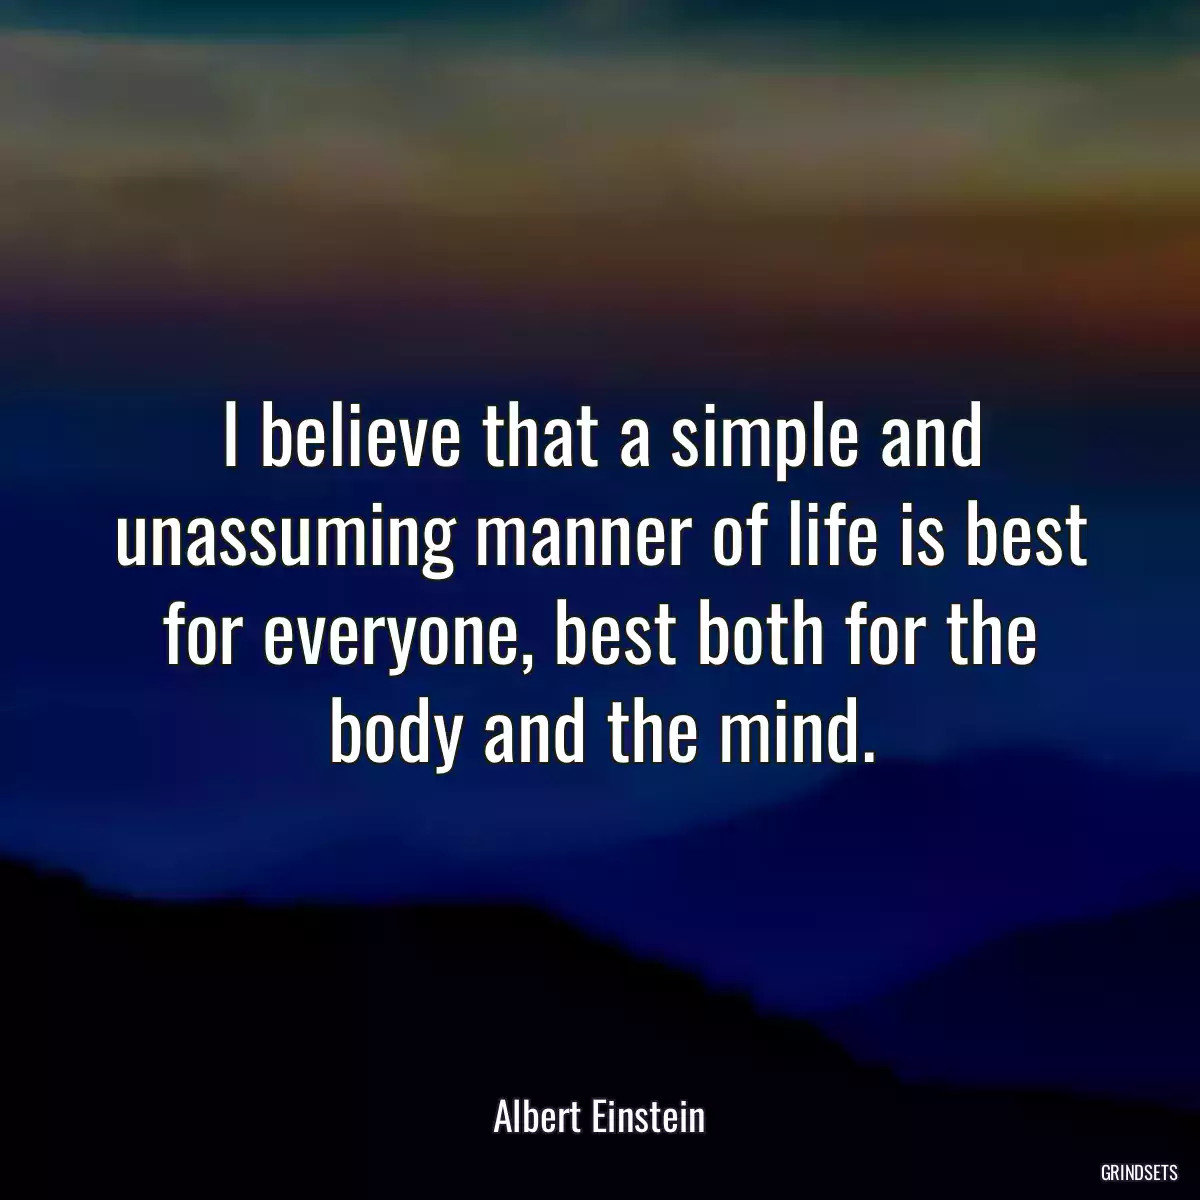 I believe that a simple and unassuming manner of life is best for everyone, best both for the body and the mind.